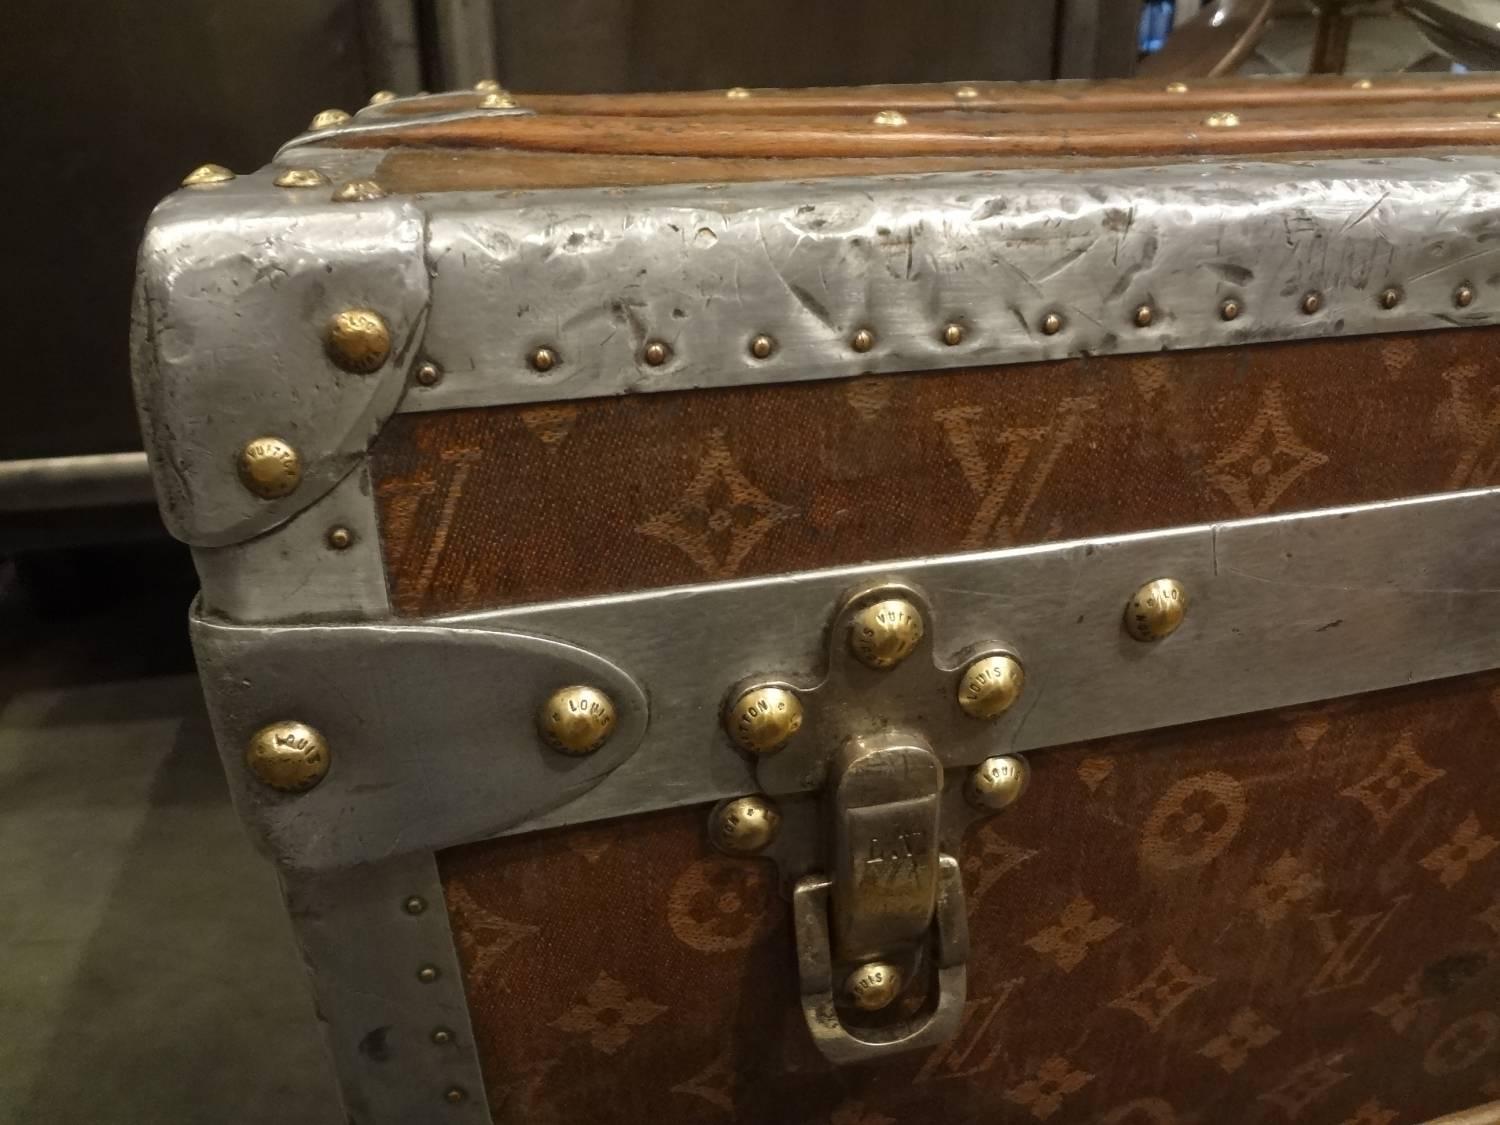 Very large and extremely beautiful Louis Vuitton trunk (steam trunk), with all the quality one would expect. Produced back in 1897, with the finest aluminium detailing. Perfect patina.